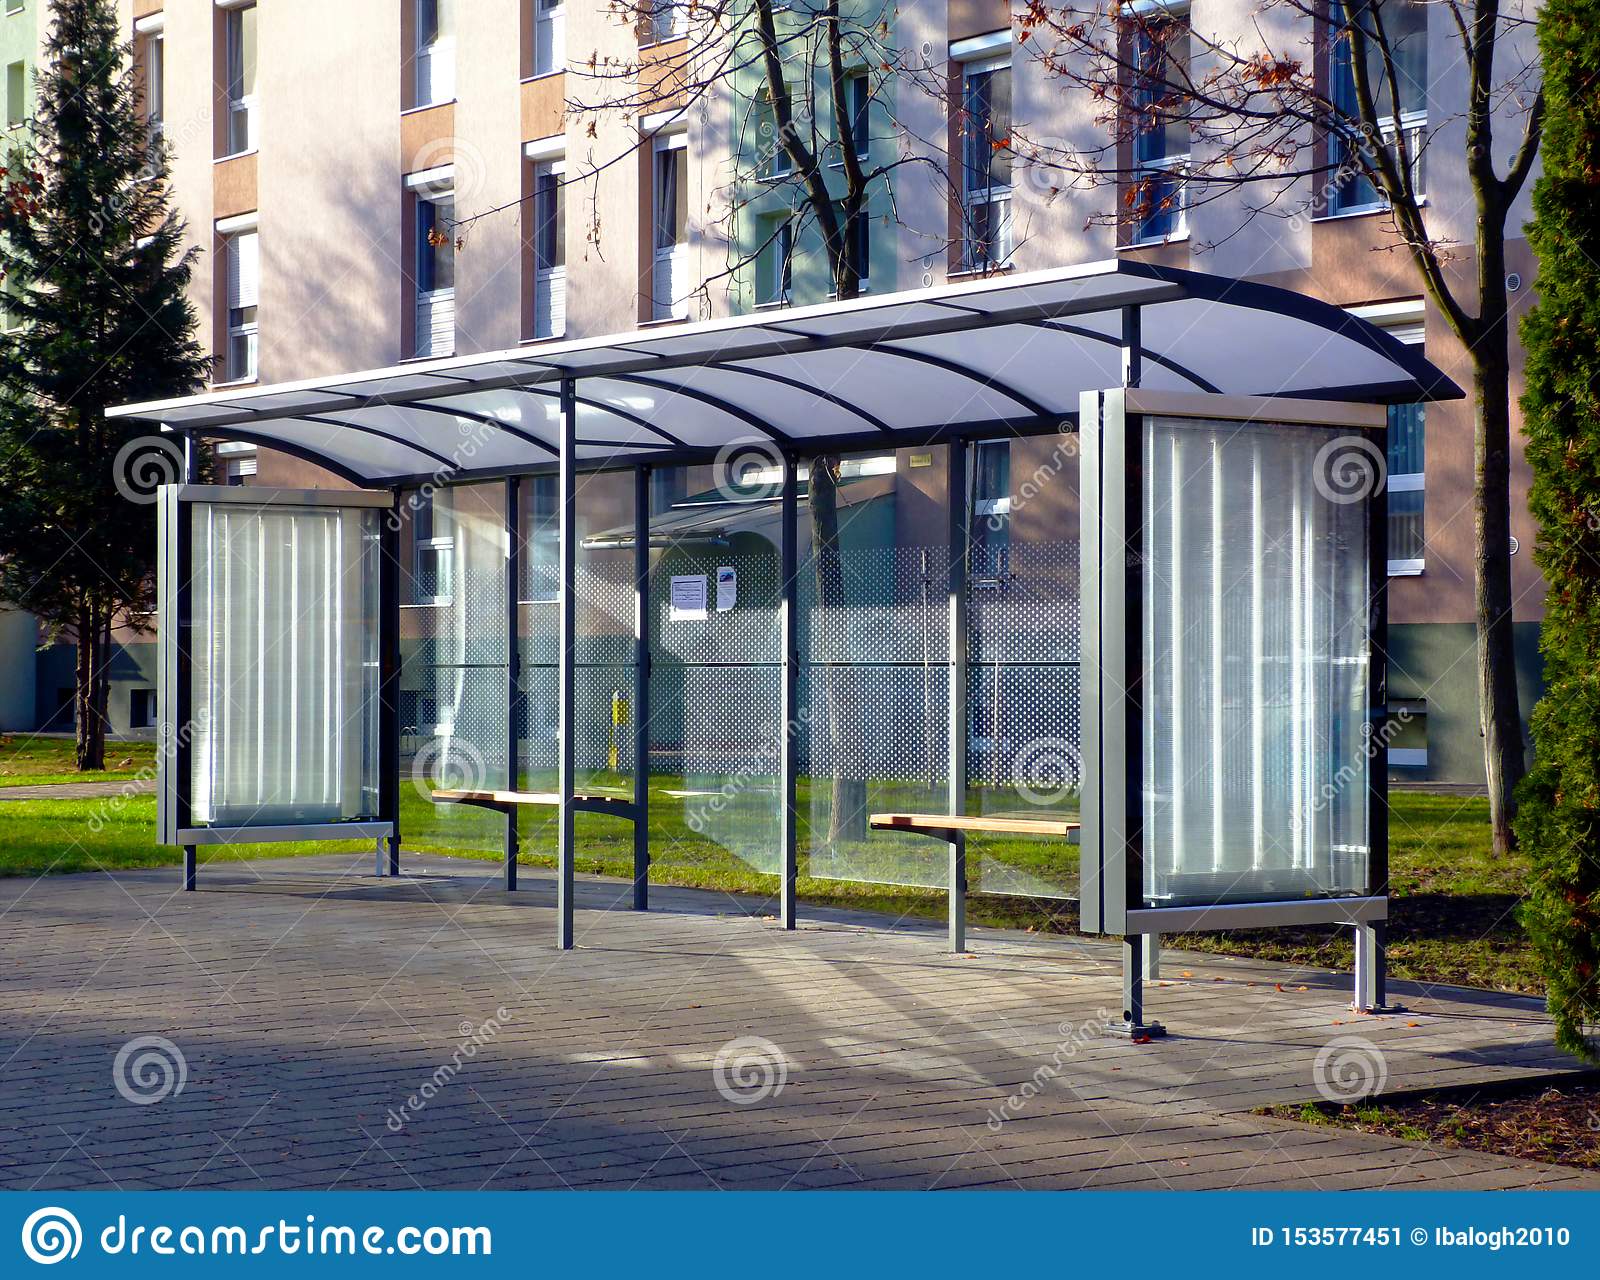 Glass Shelters for Bus Stops